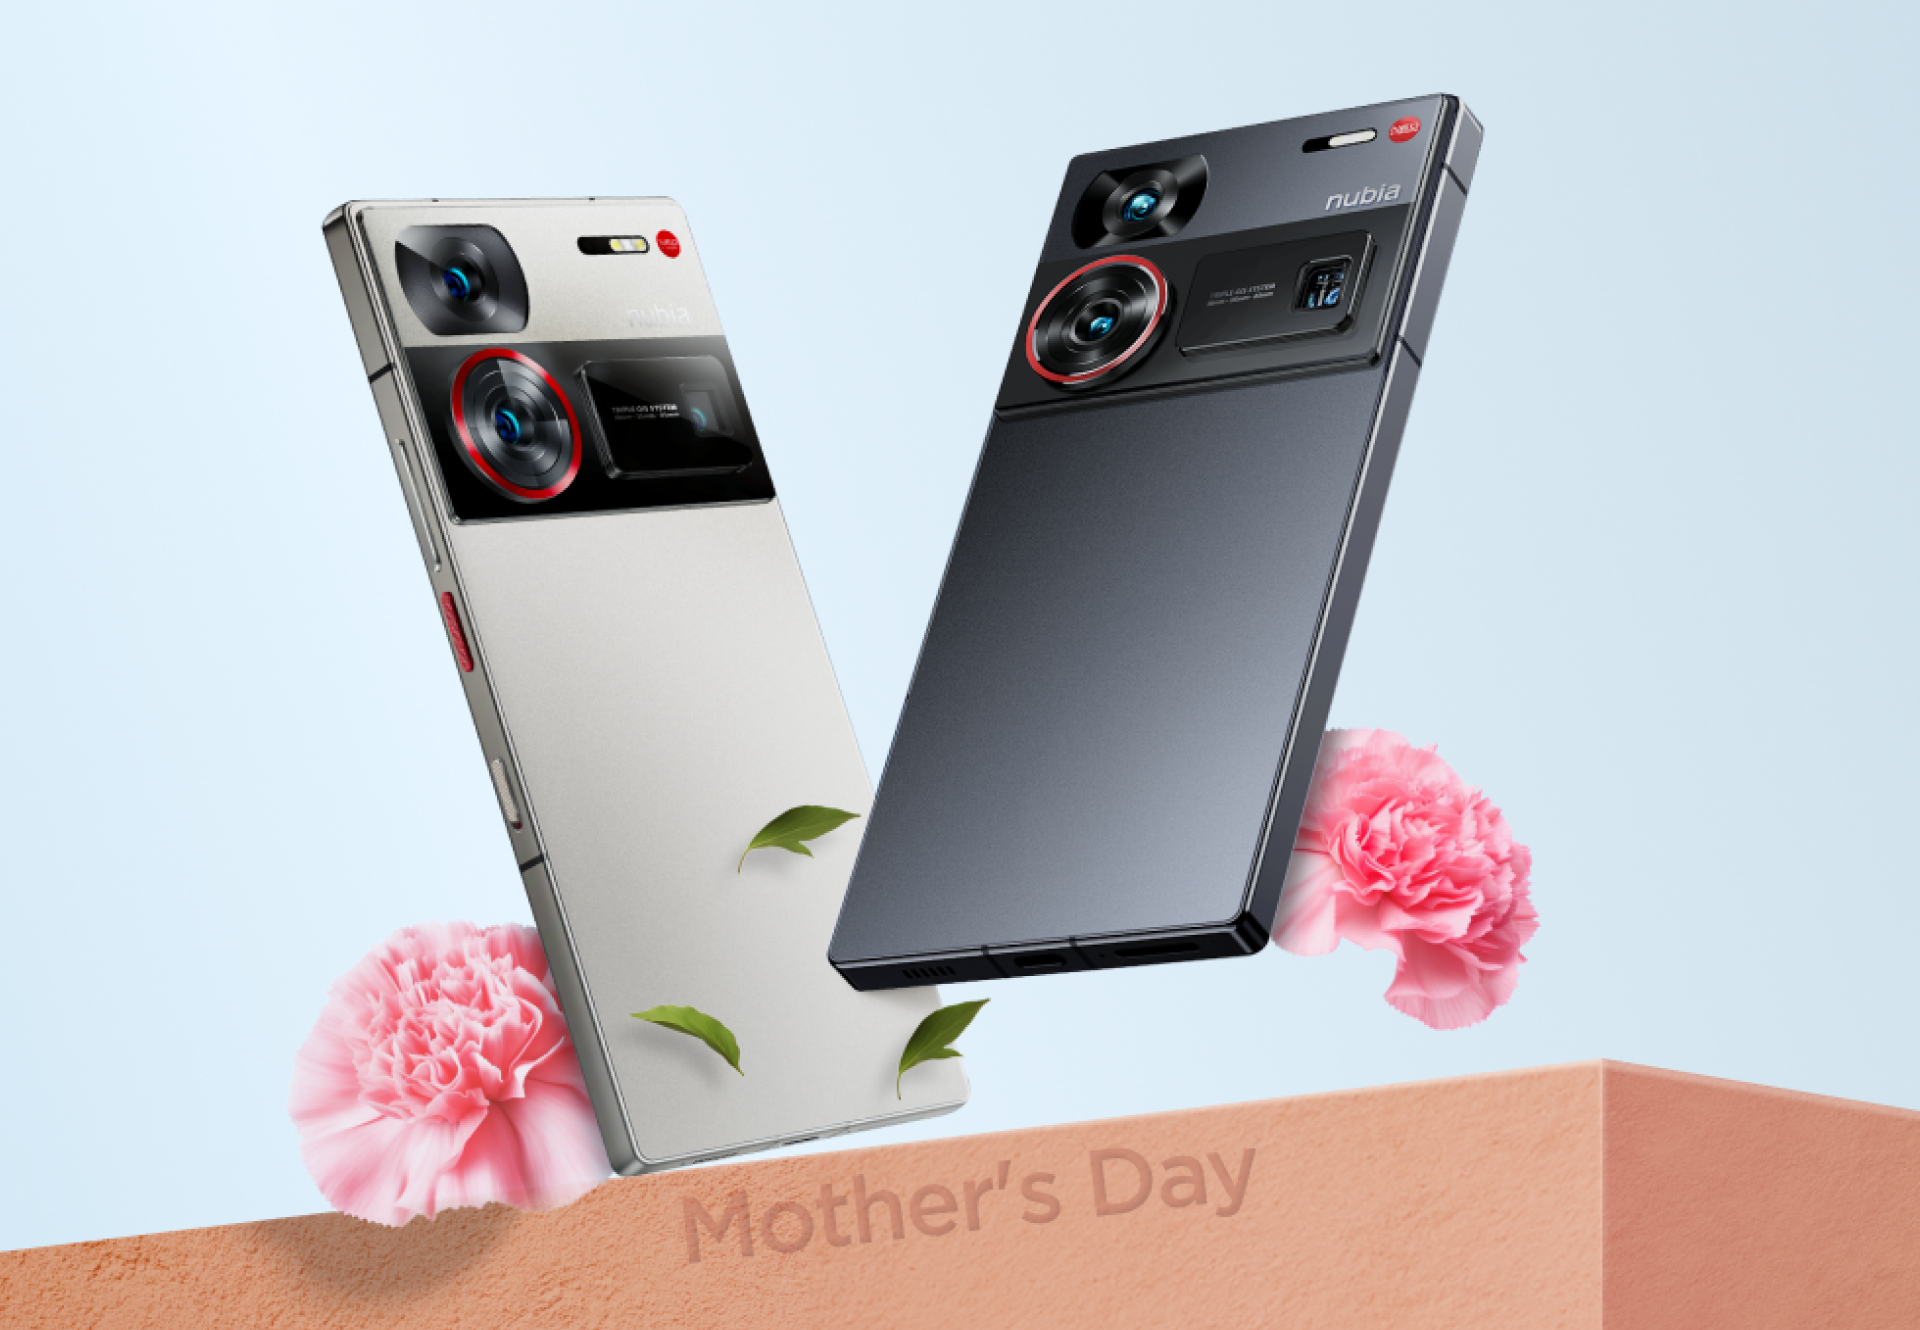 Celebrate Mother’s Day with nubia